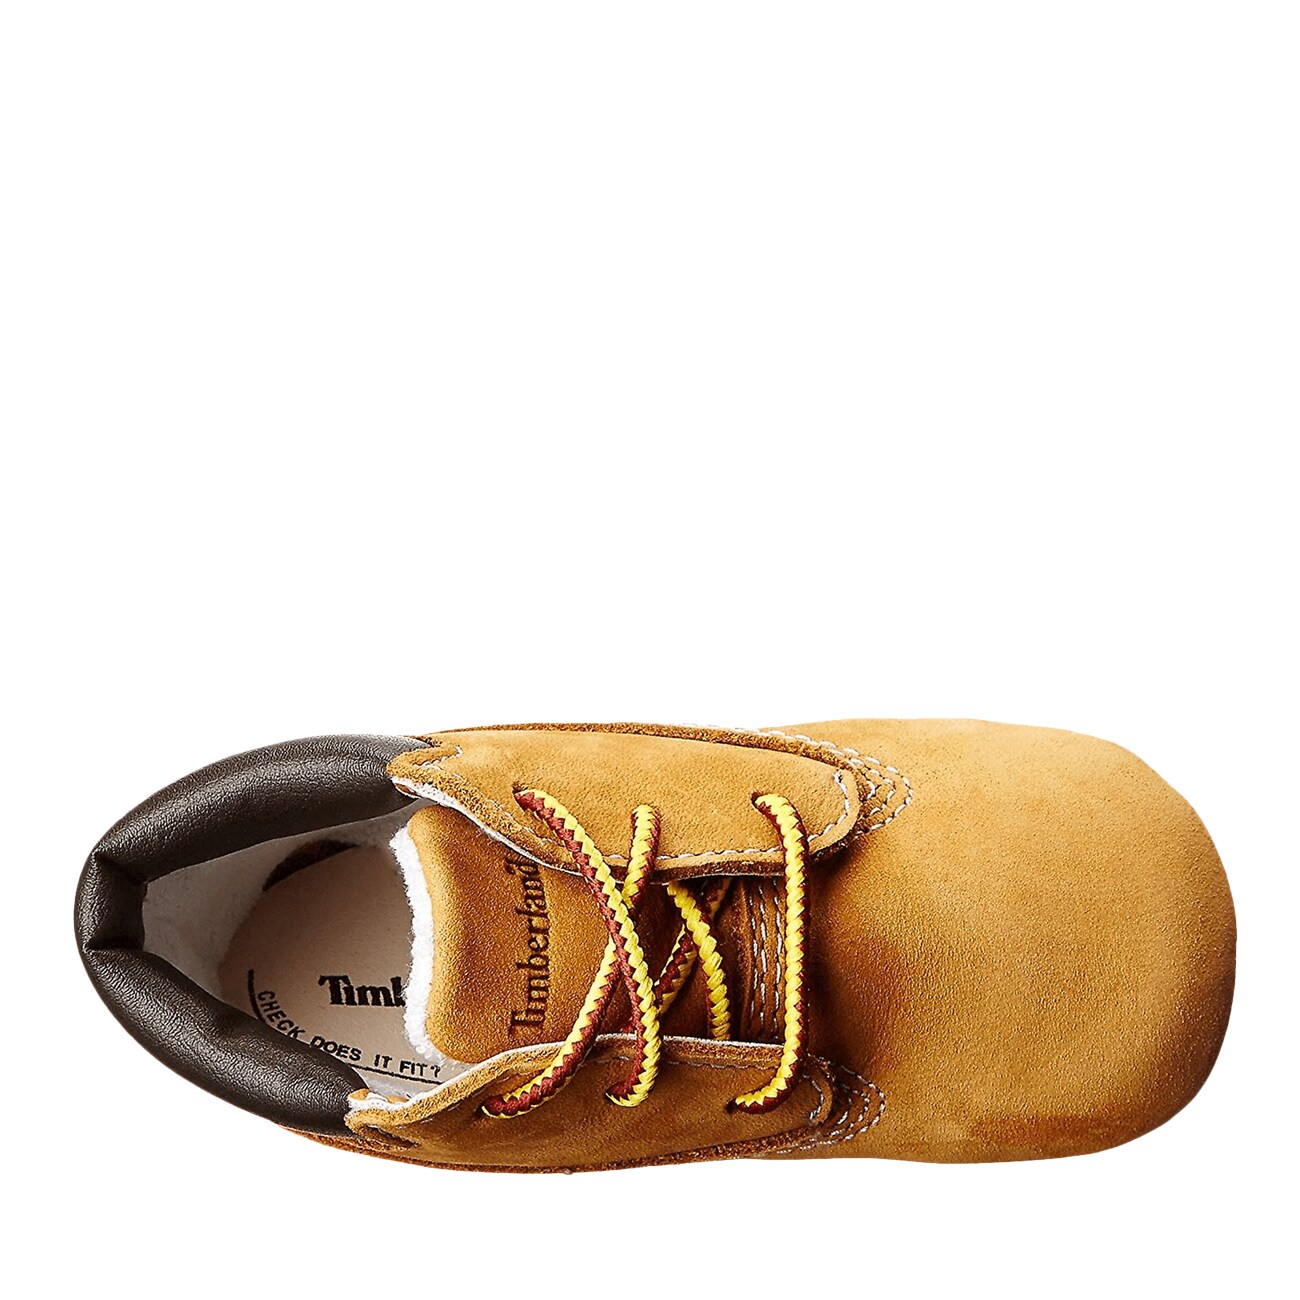 baby timberlands canada